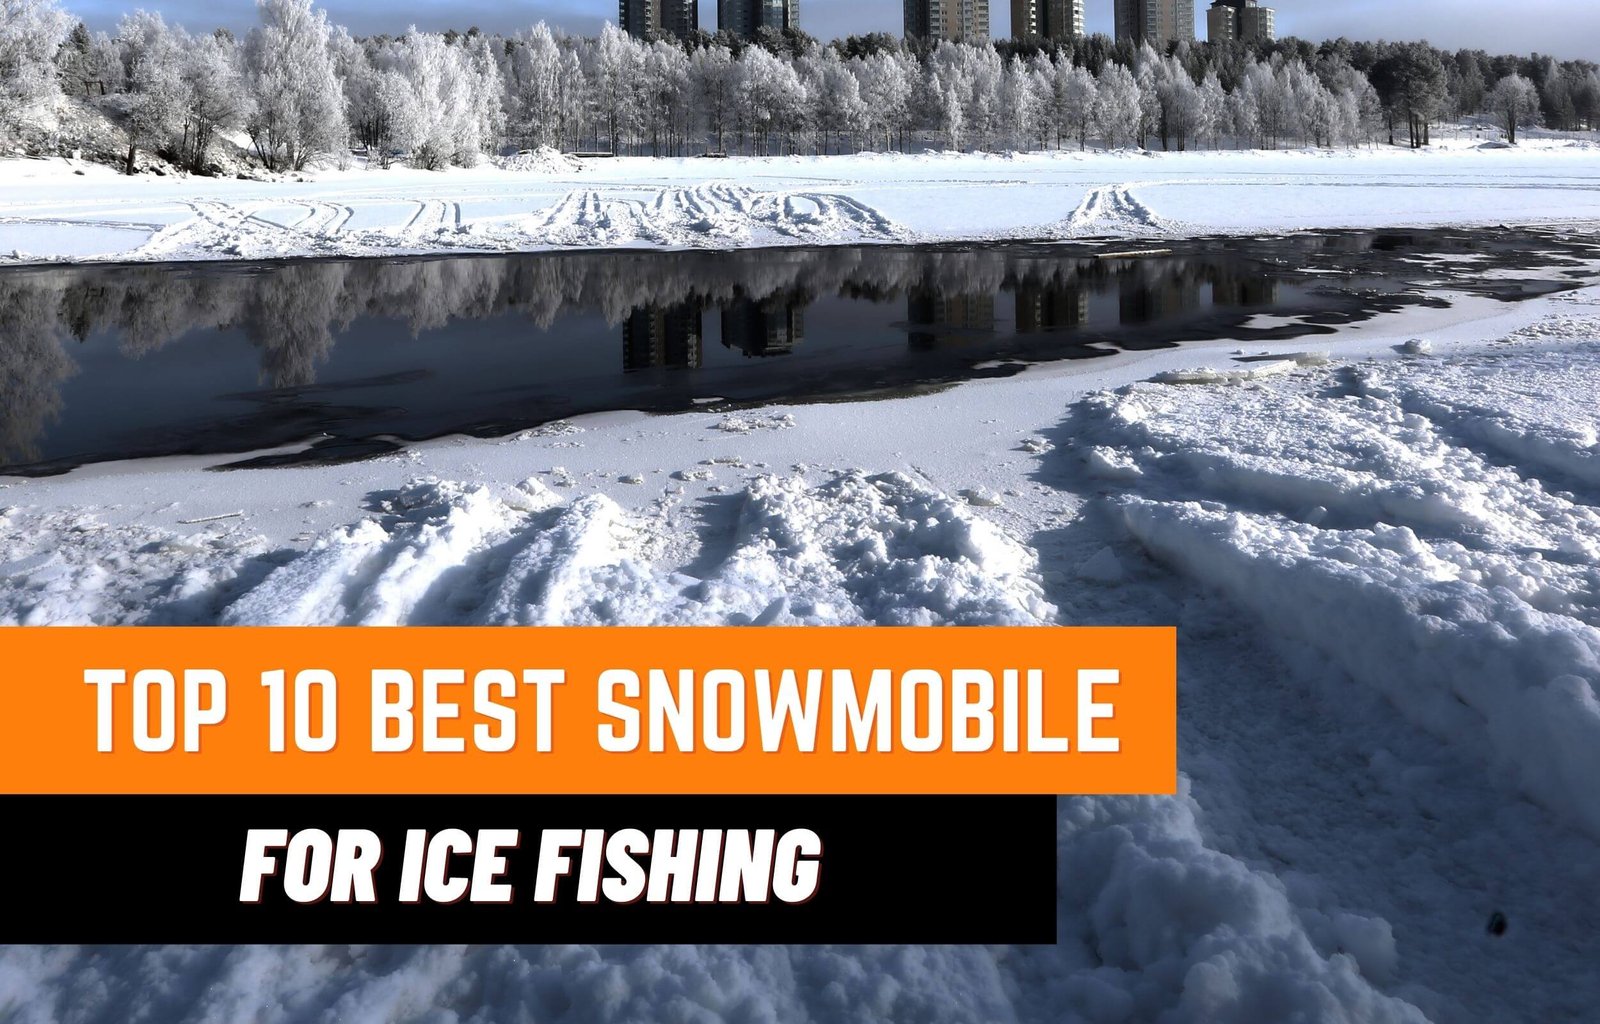 Top 10 Best Snowmobile for Ice Fishing